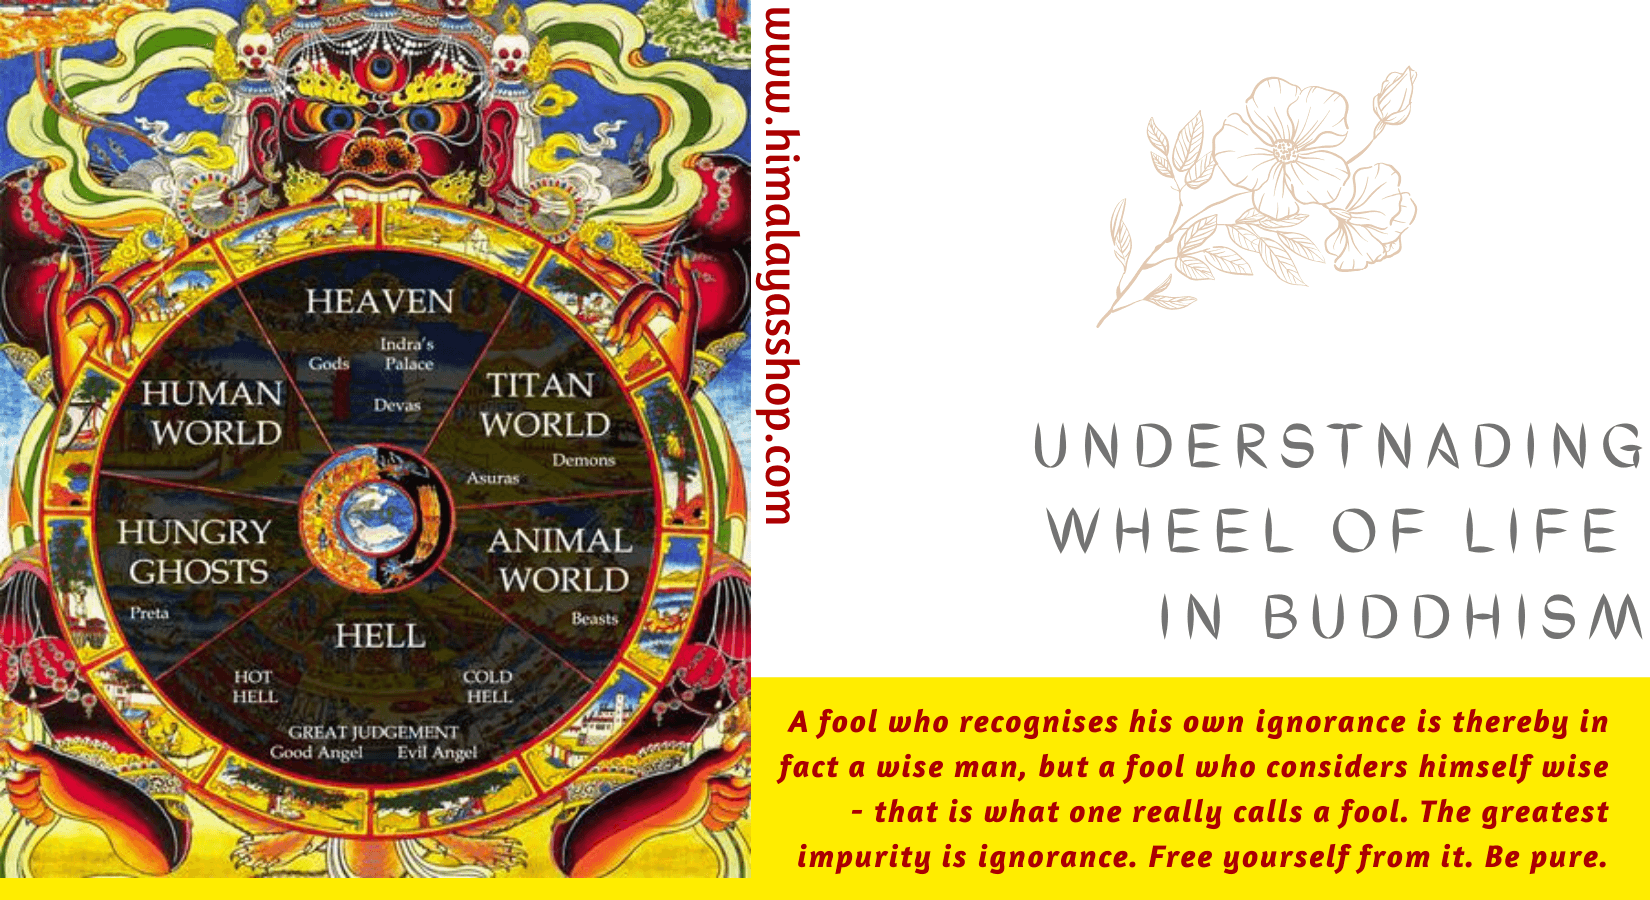 Wheel of Life in Buddhism